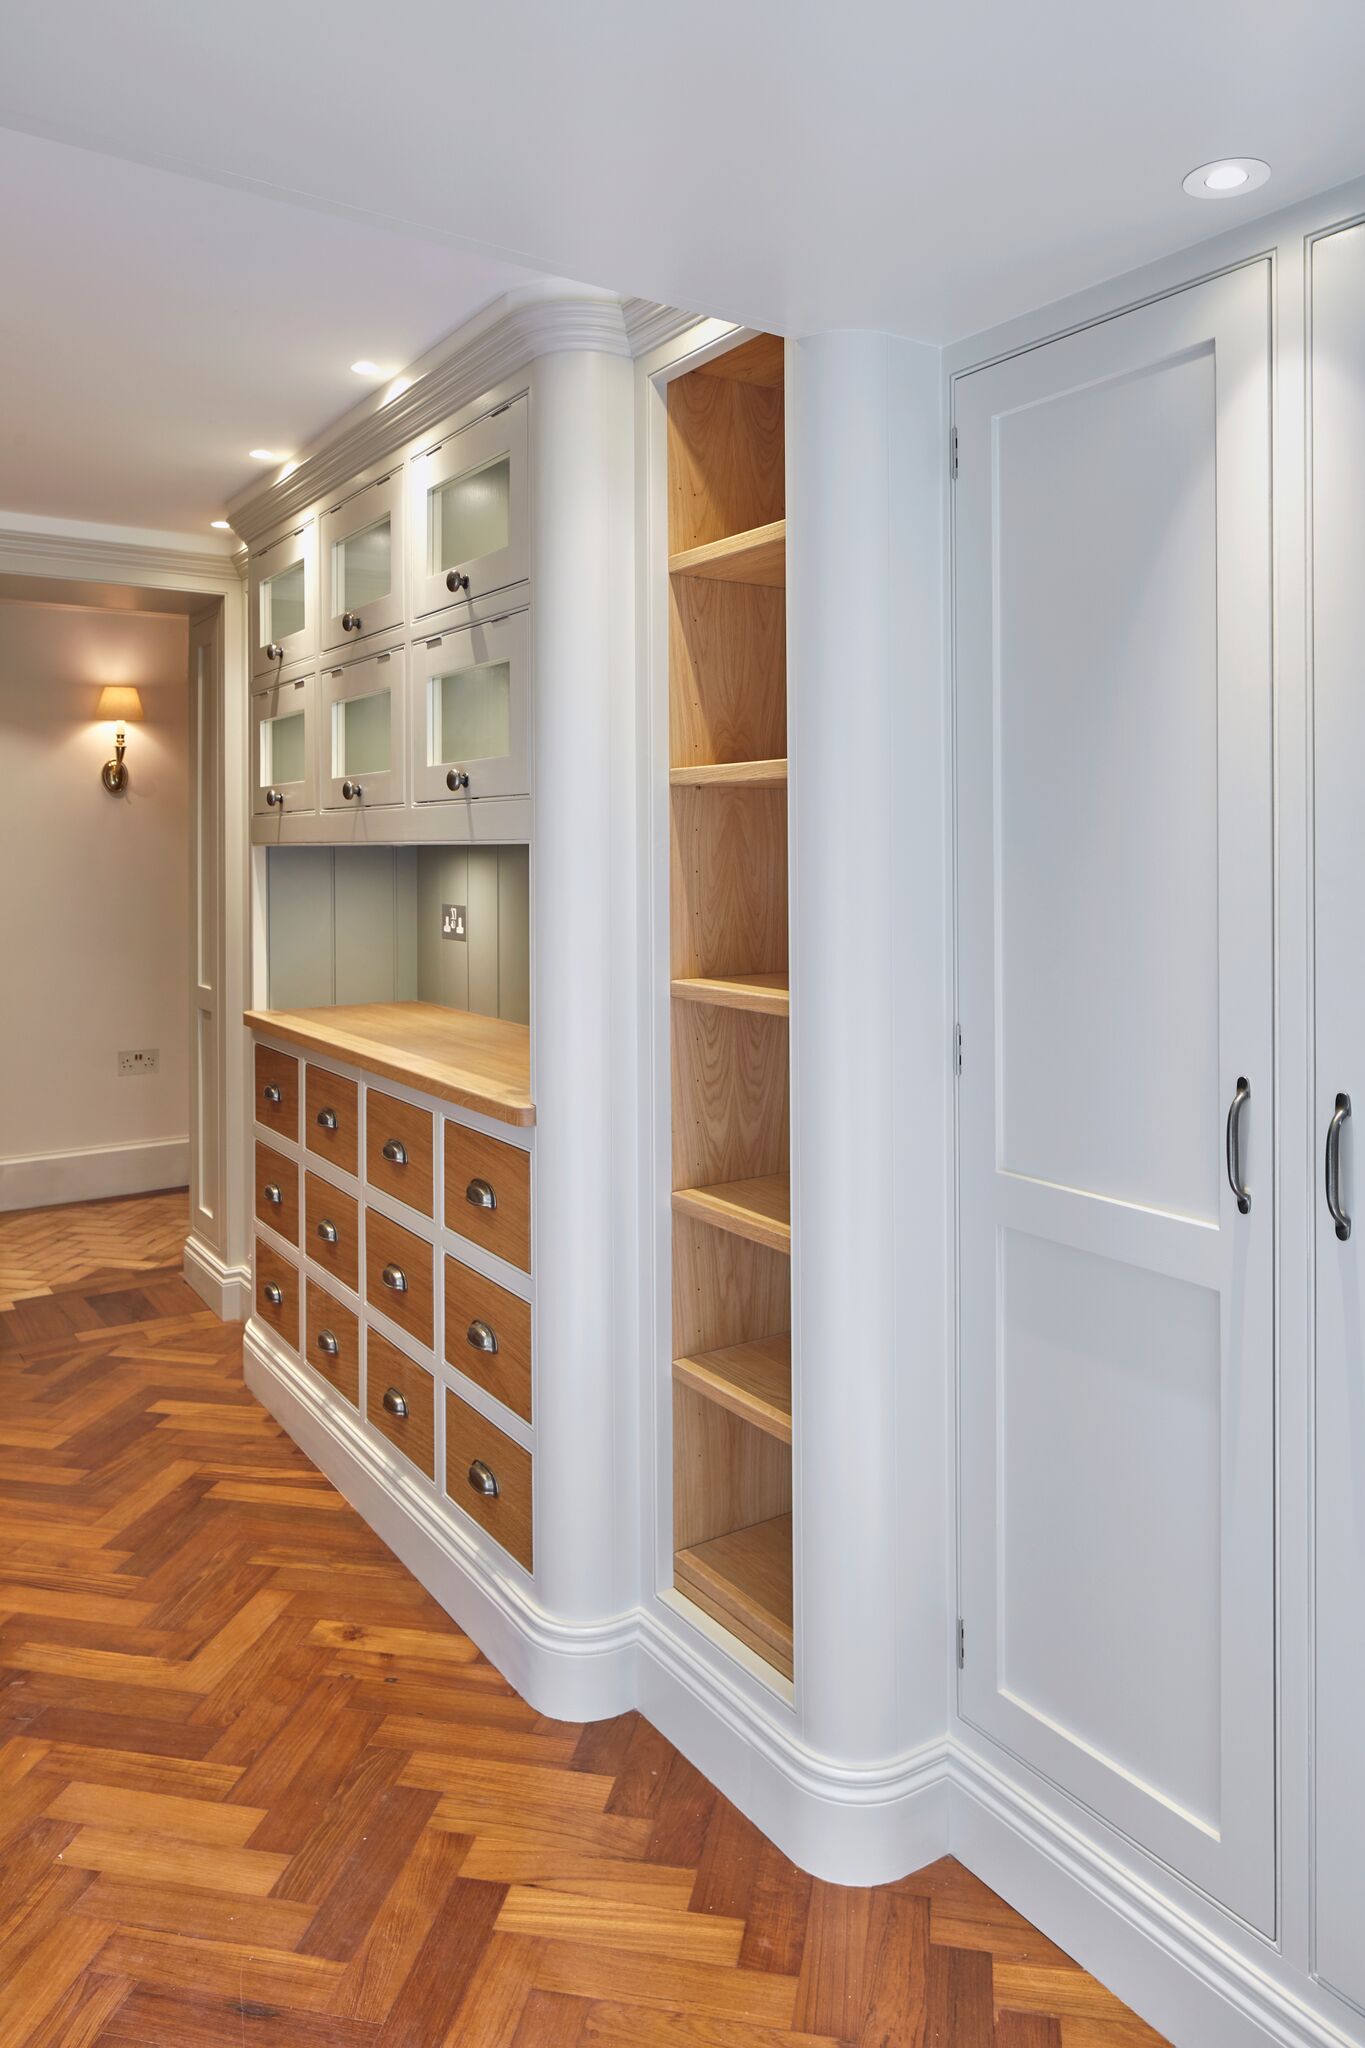 Floor to ceiling apothecary cabinet style storage unit bespoke furniture design Oxfordshire